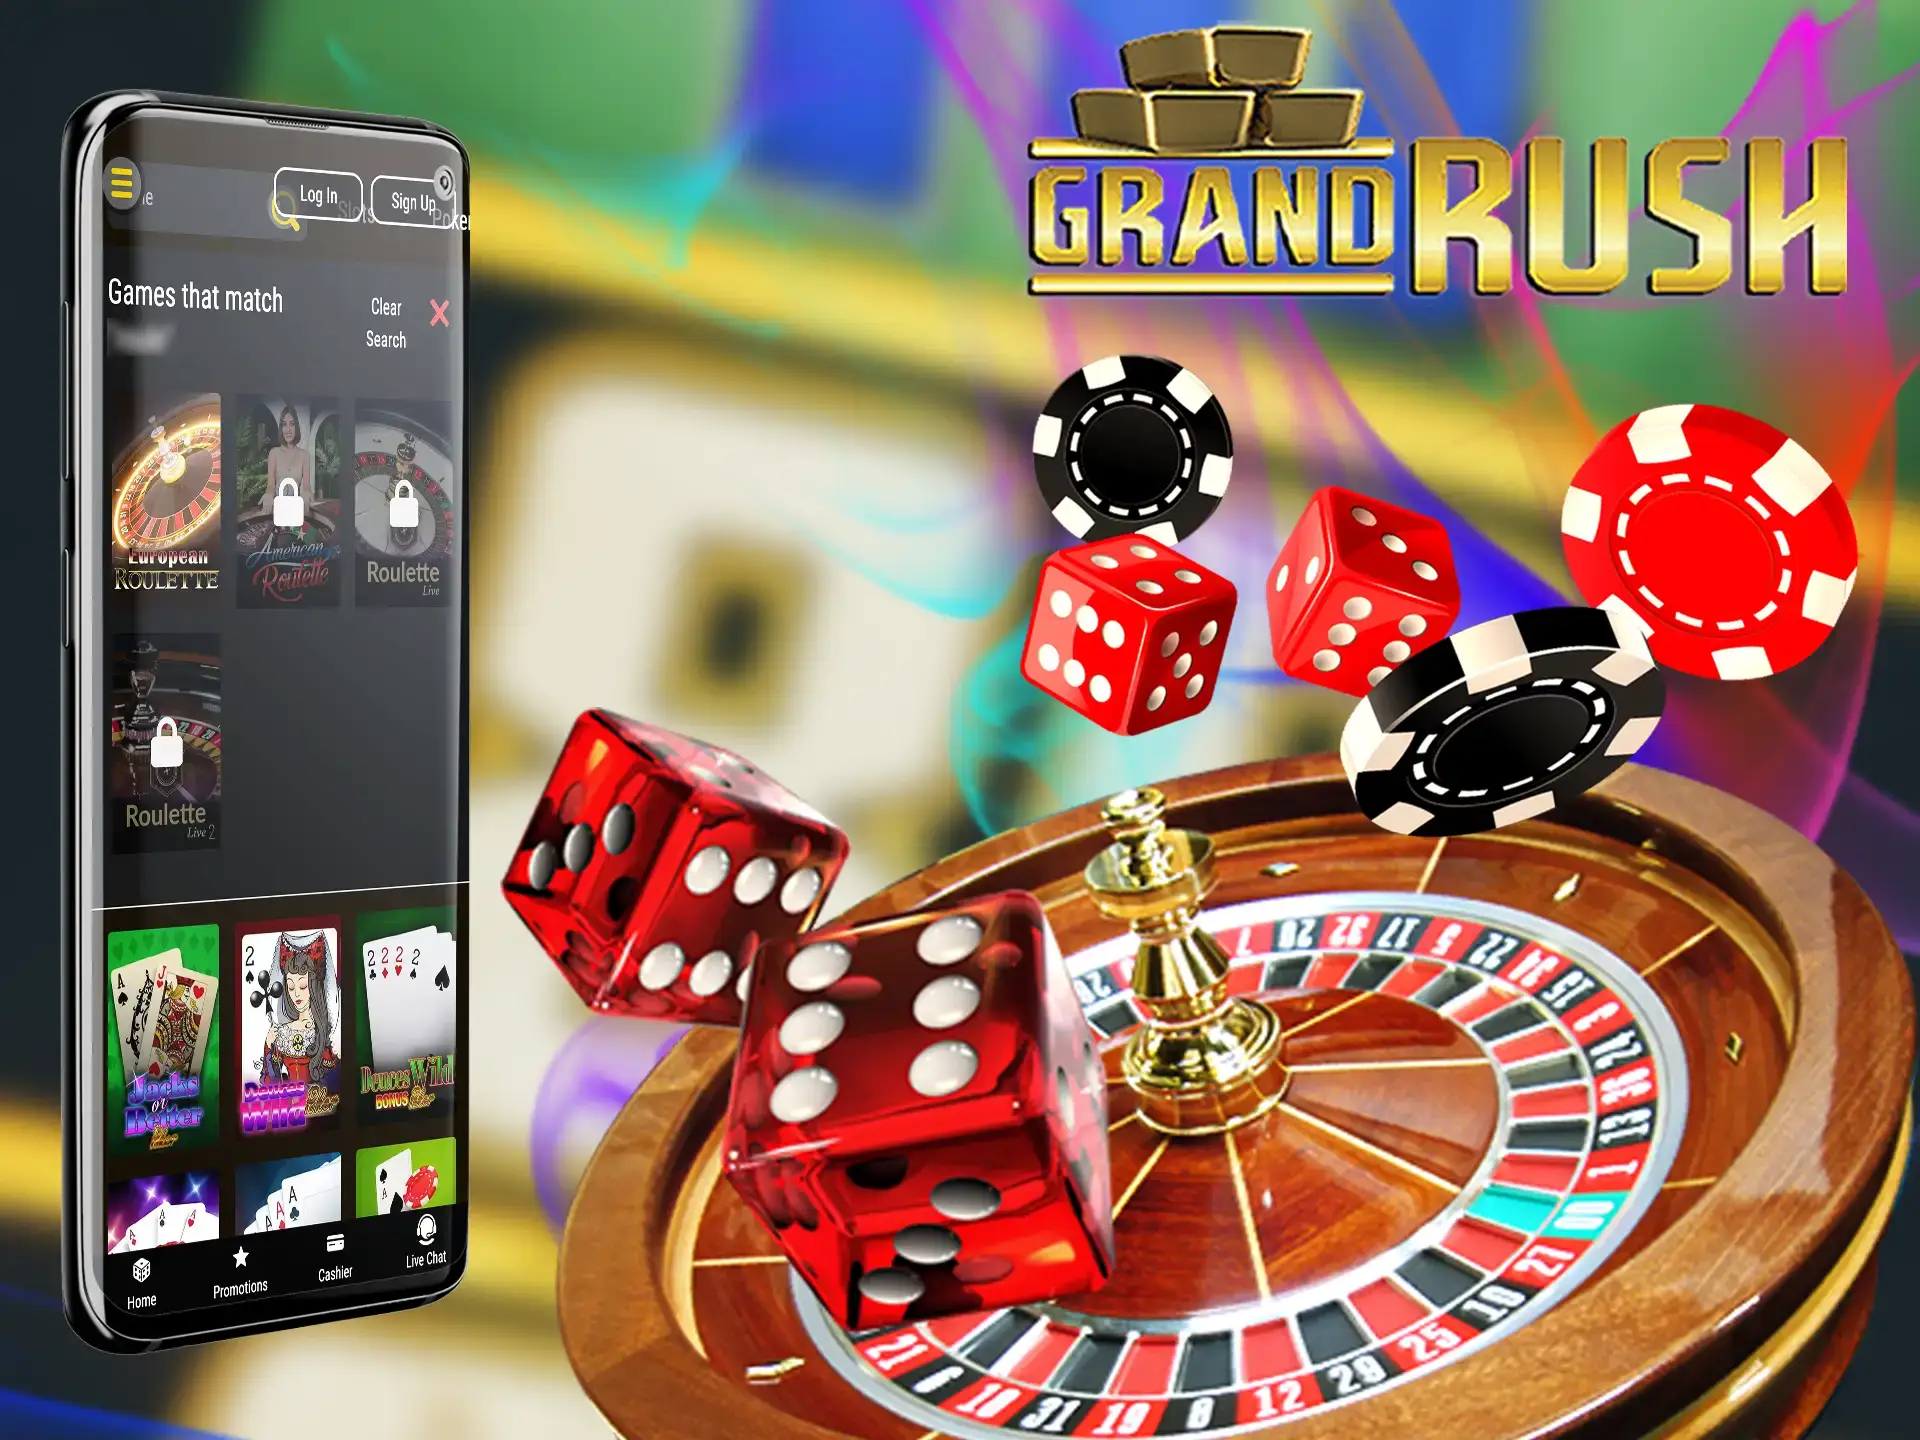 Sign up and make a deposit to play Roulette at Grand Rush online casino.